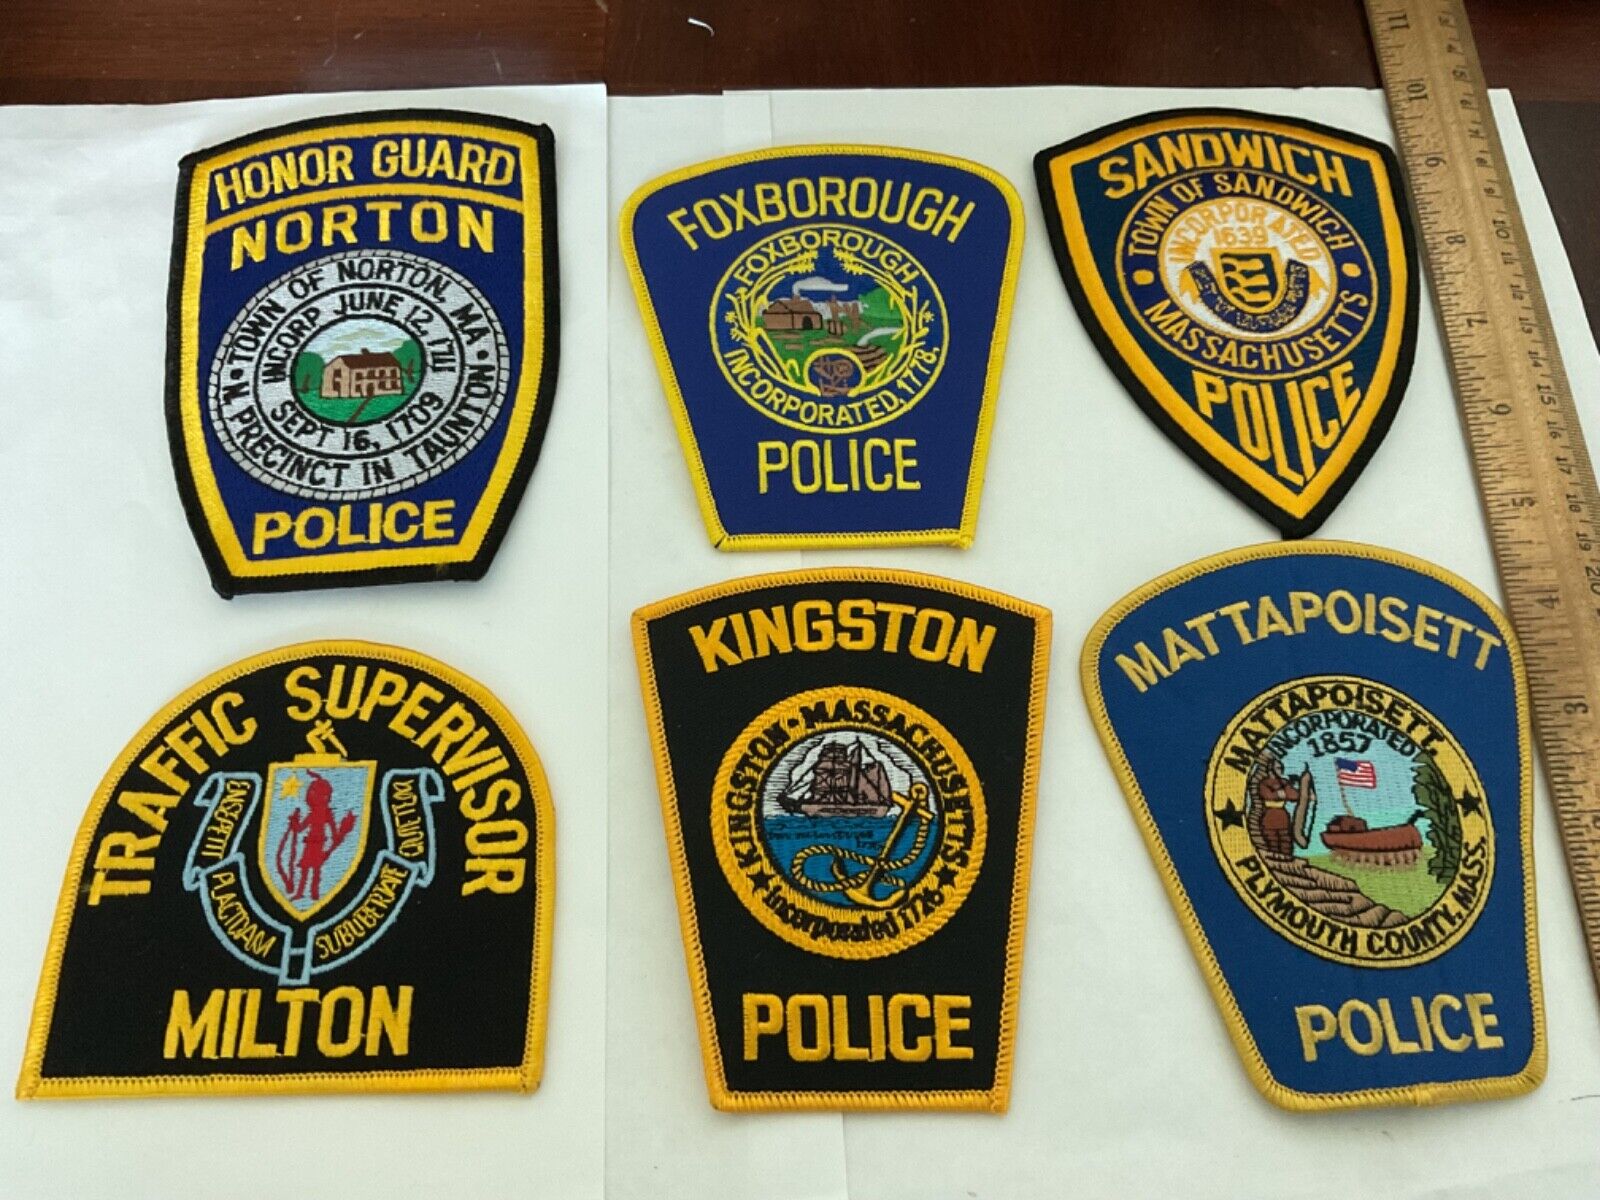 Massachusetts Police LawEnforcement collectable patches new full size 6 titles